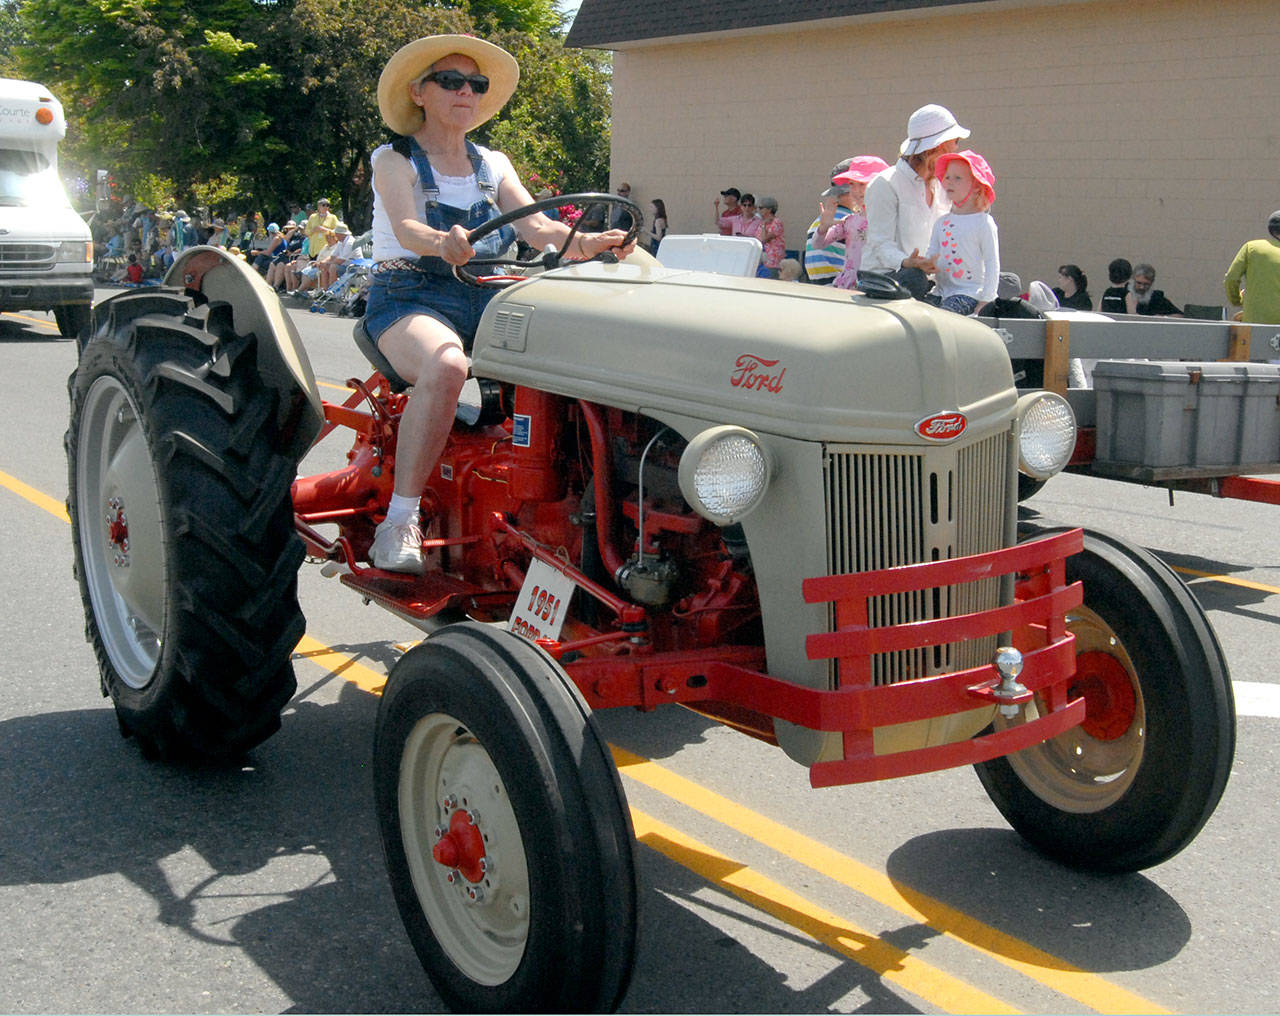 Kay Emmeret drives a vintage 1951 Ford tractor as part of a parade entry for Lonnie Love. (Keith Thorpe/Peninsula Daily News)